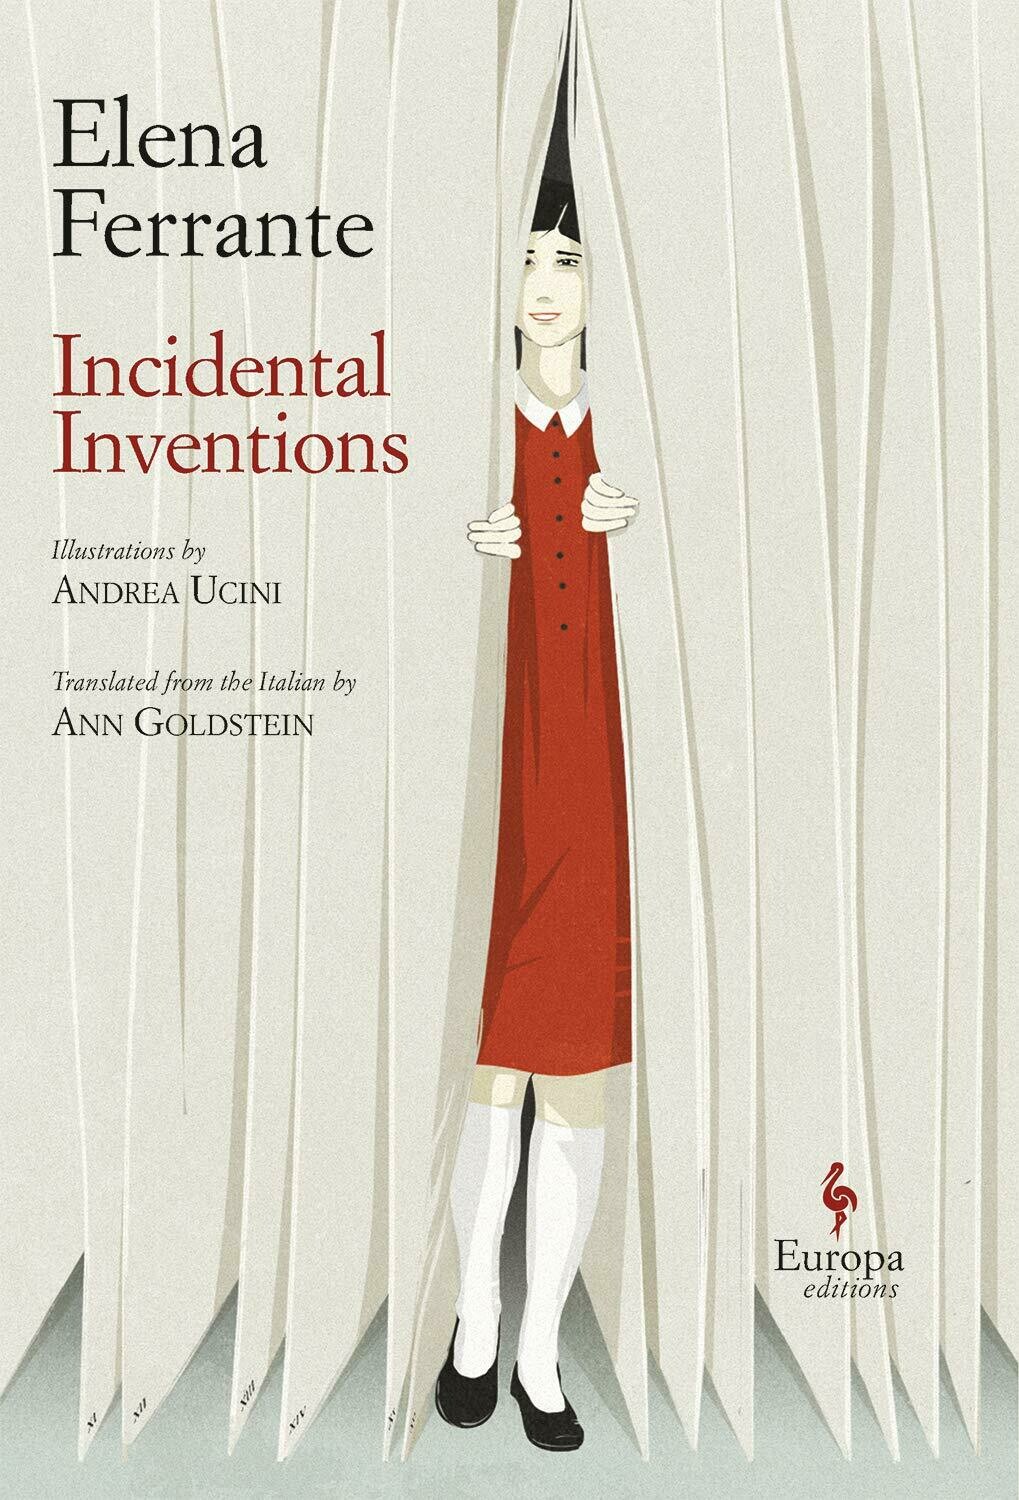 Incidental Inventions by Elena Ferrante